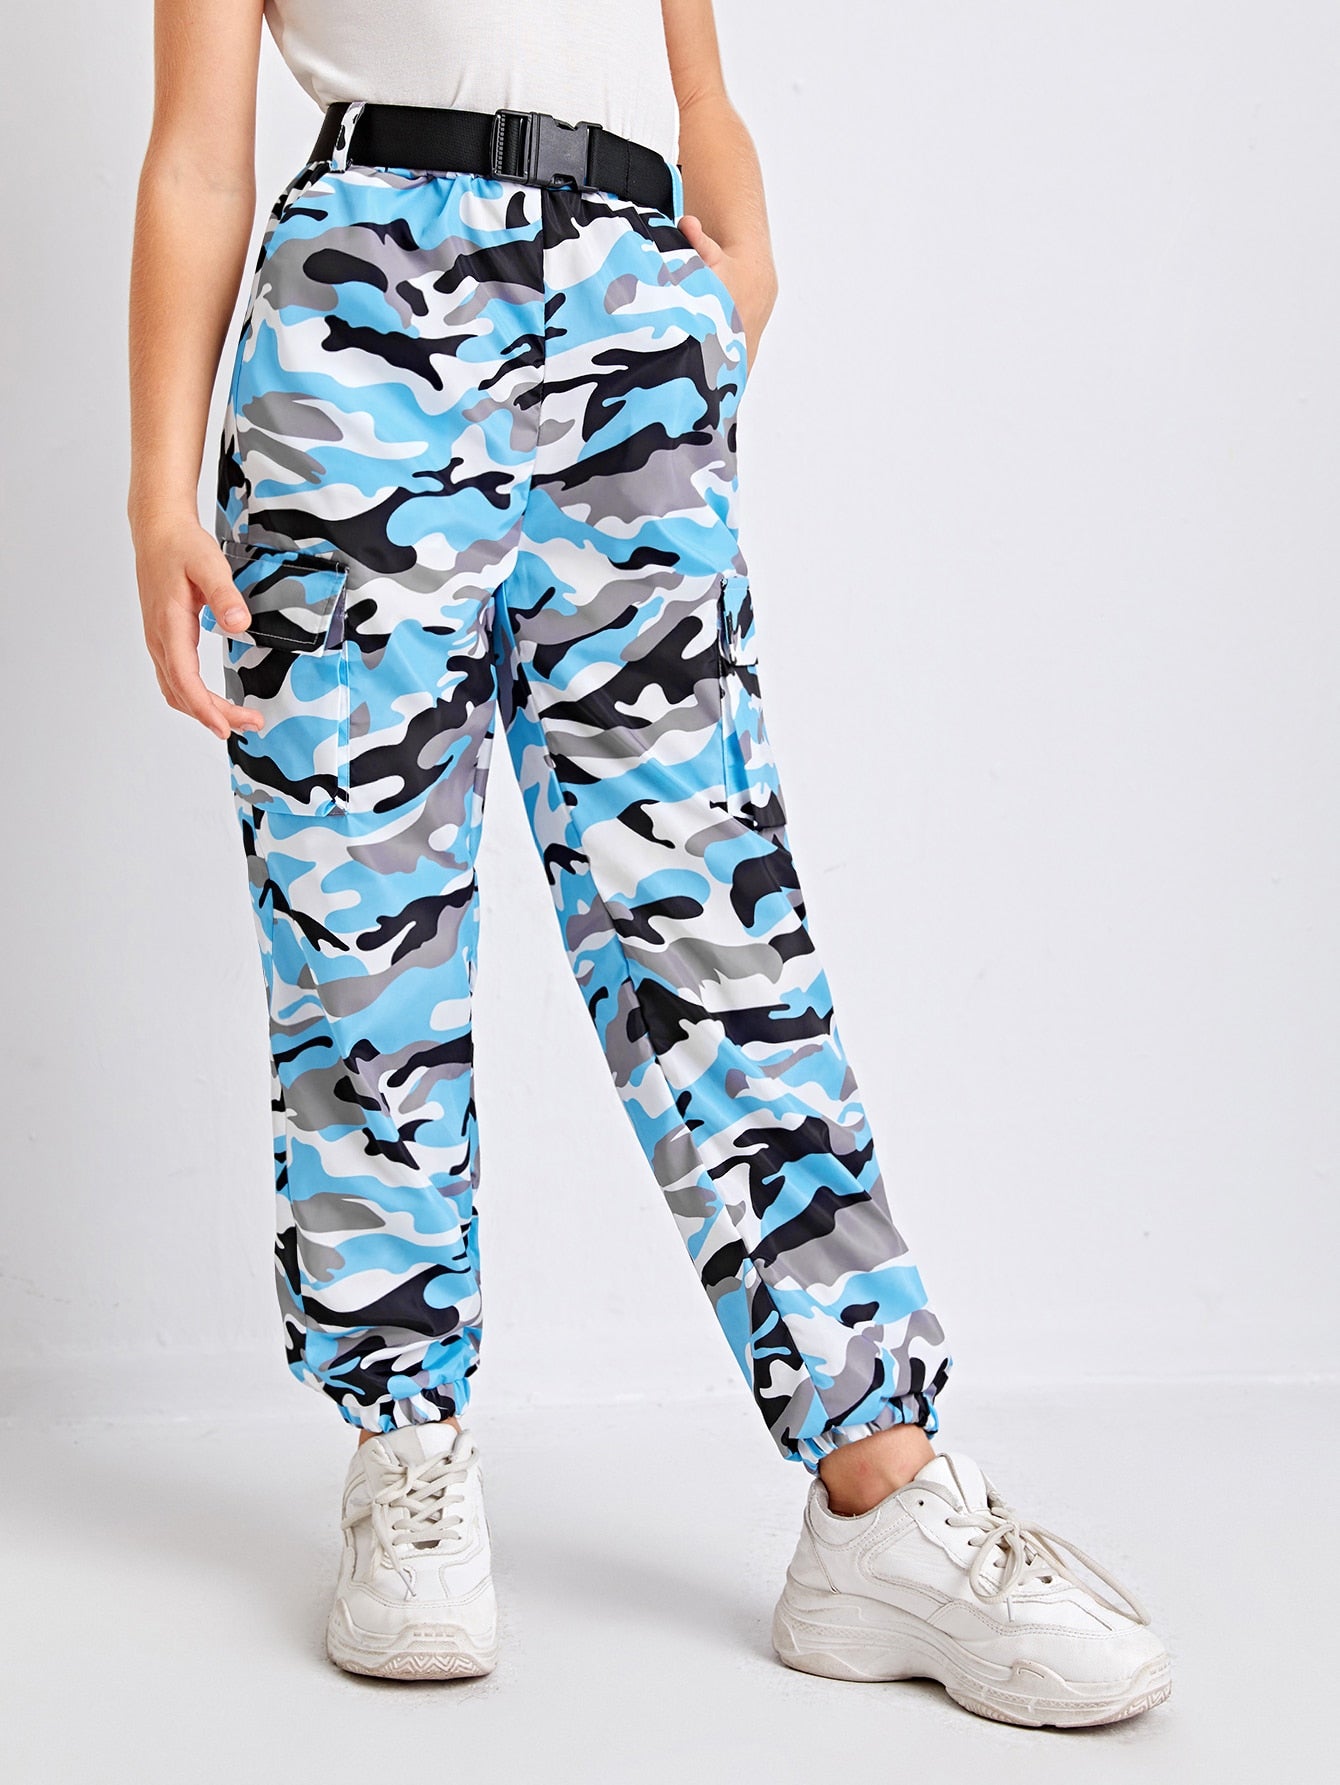 Buy Blue Camo Pants Online In India  Etsy India